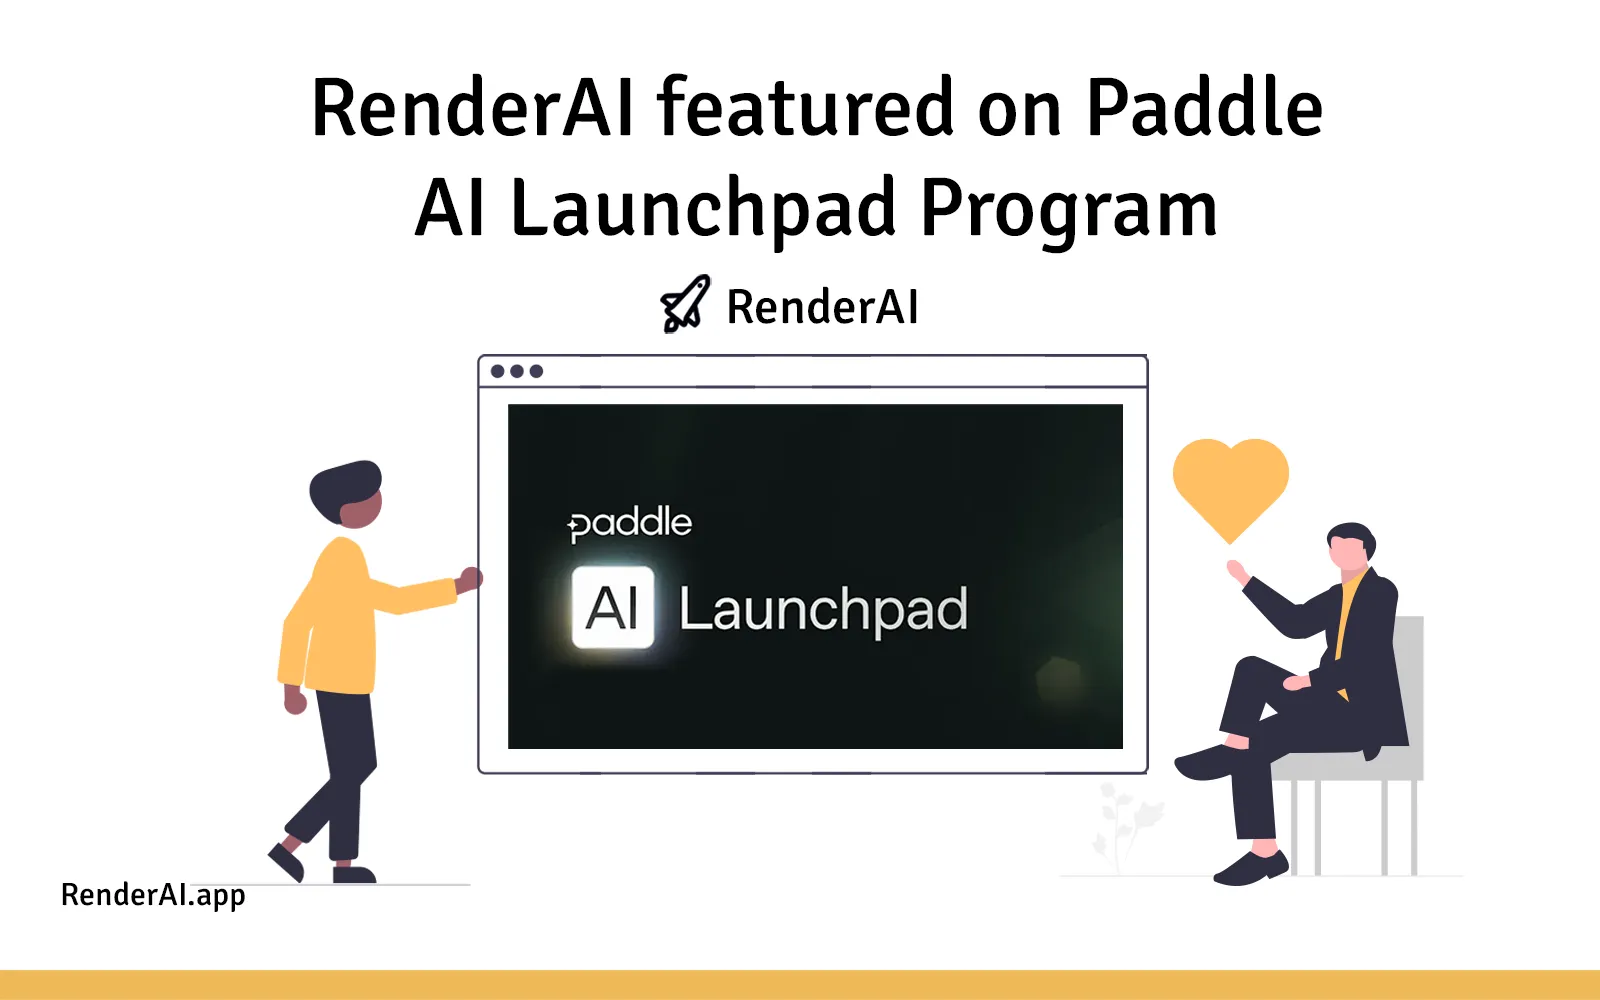 Scale-Up: RenderAI is part of Paddle AI Launchpad